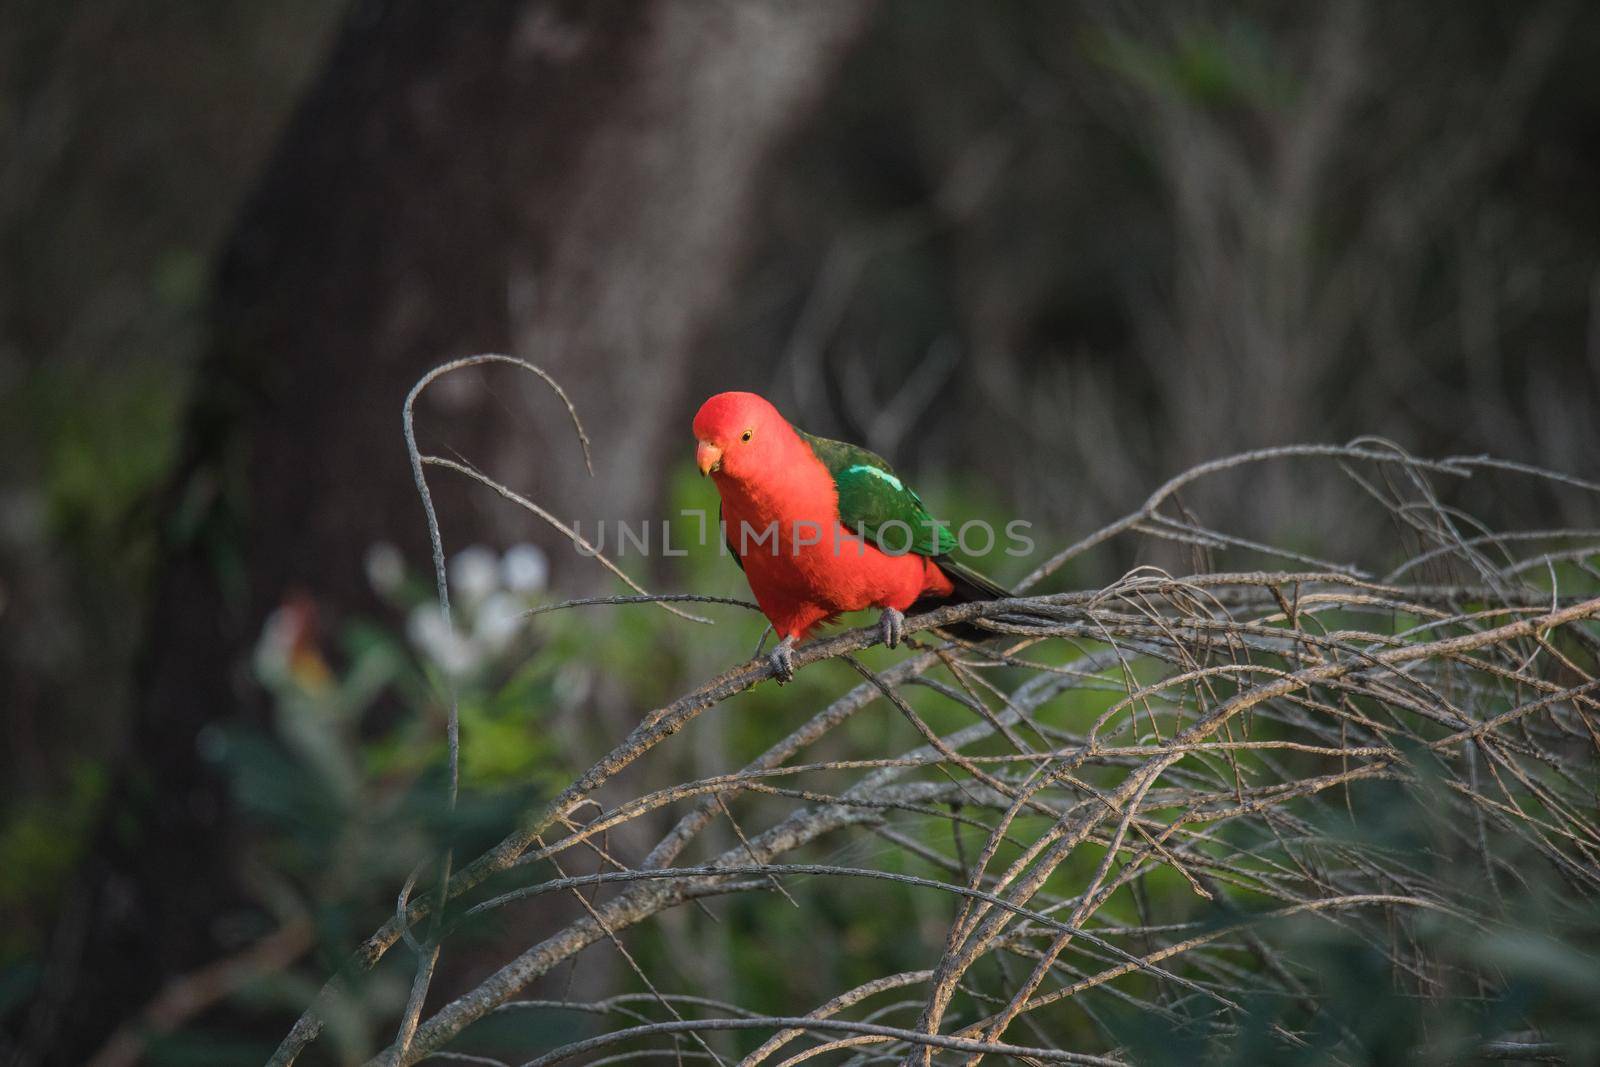 Australian King Parrot Perched in tree. High quality photo